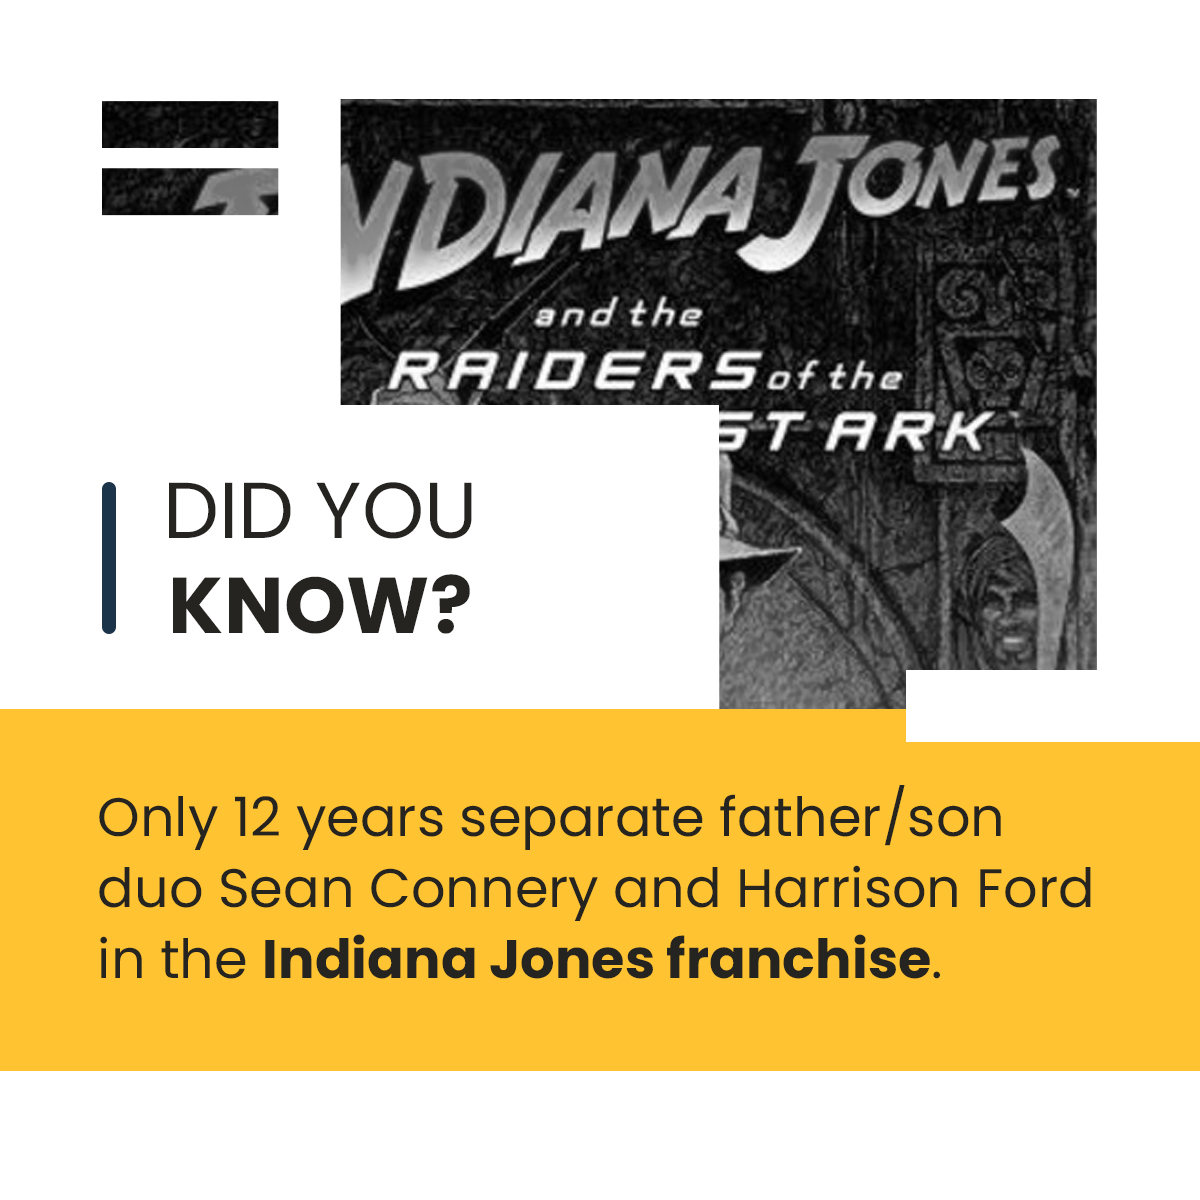 What an oversight by the writers!

#moviesfacts #didyouknowfacts